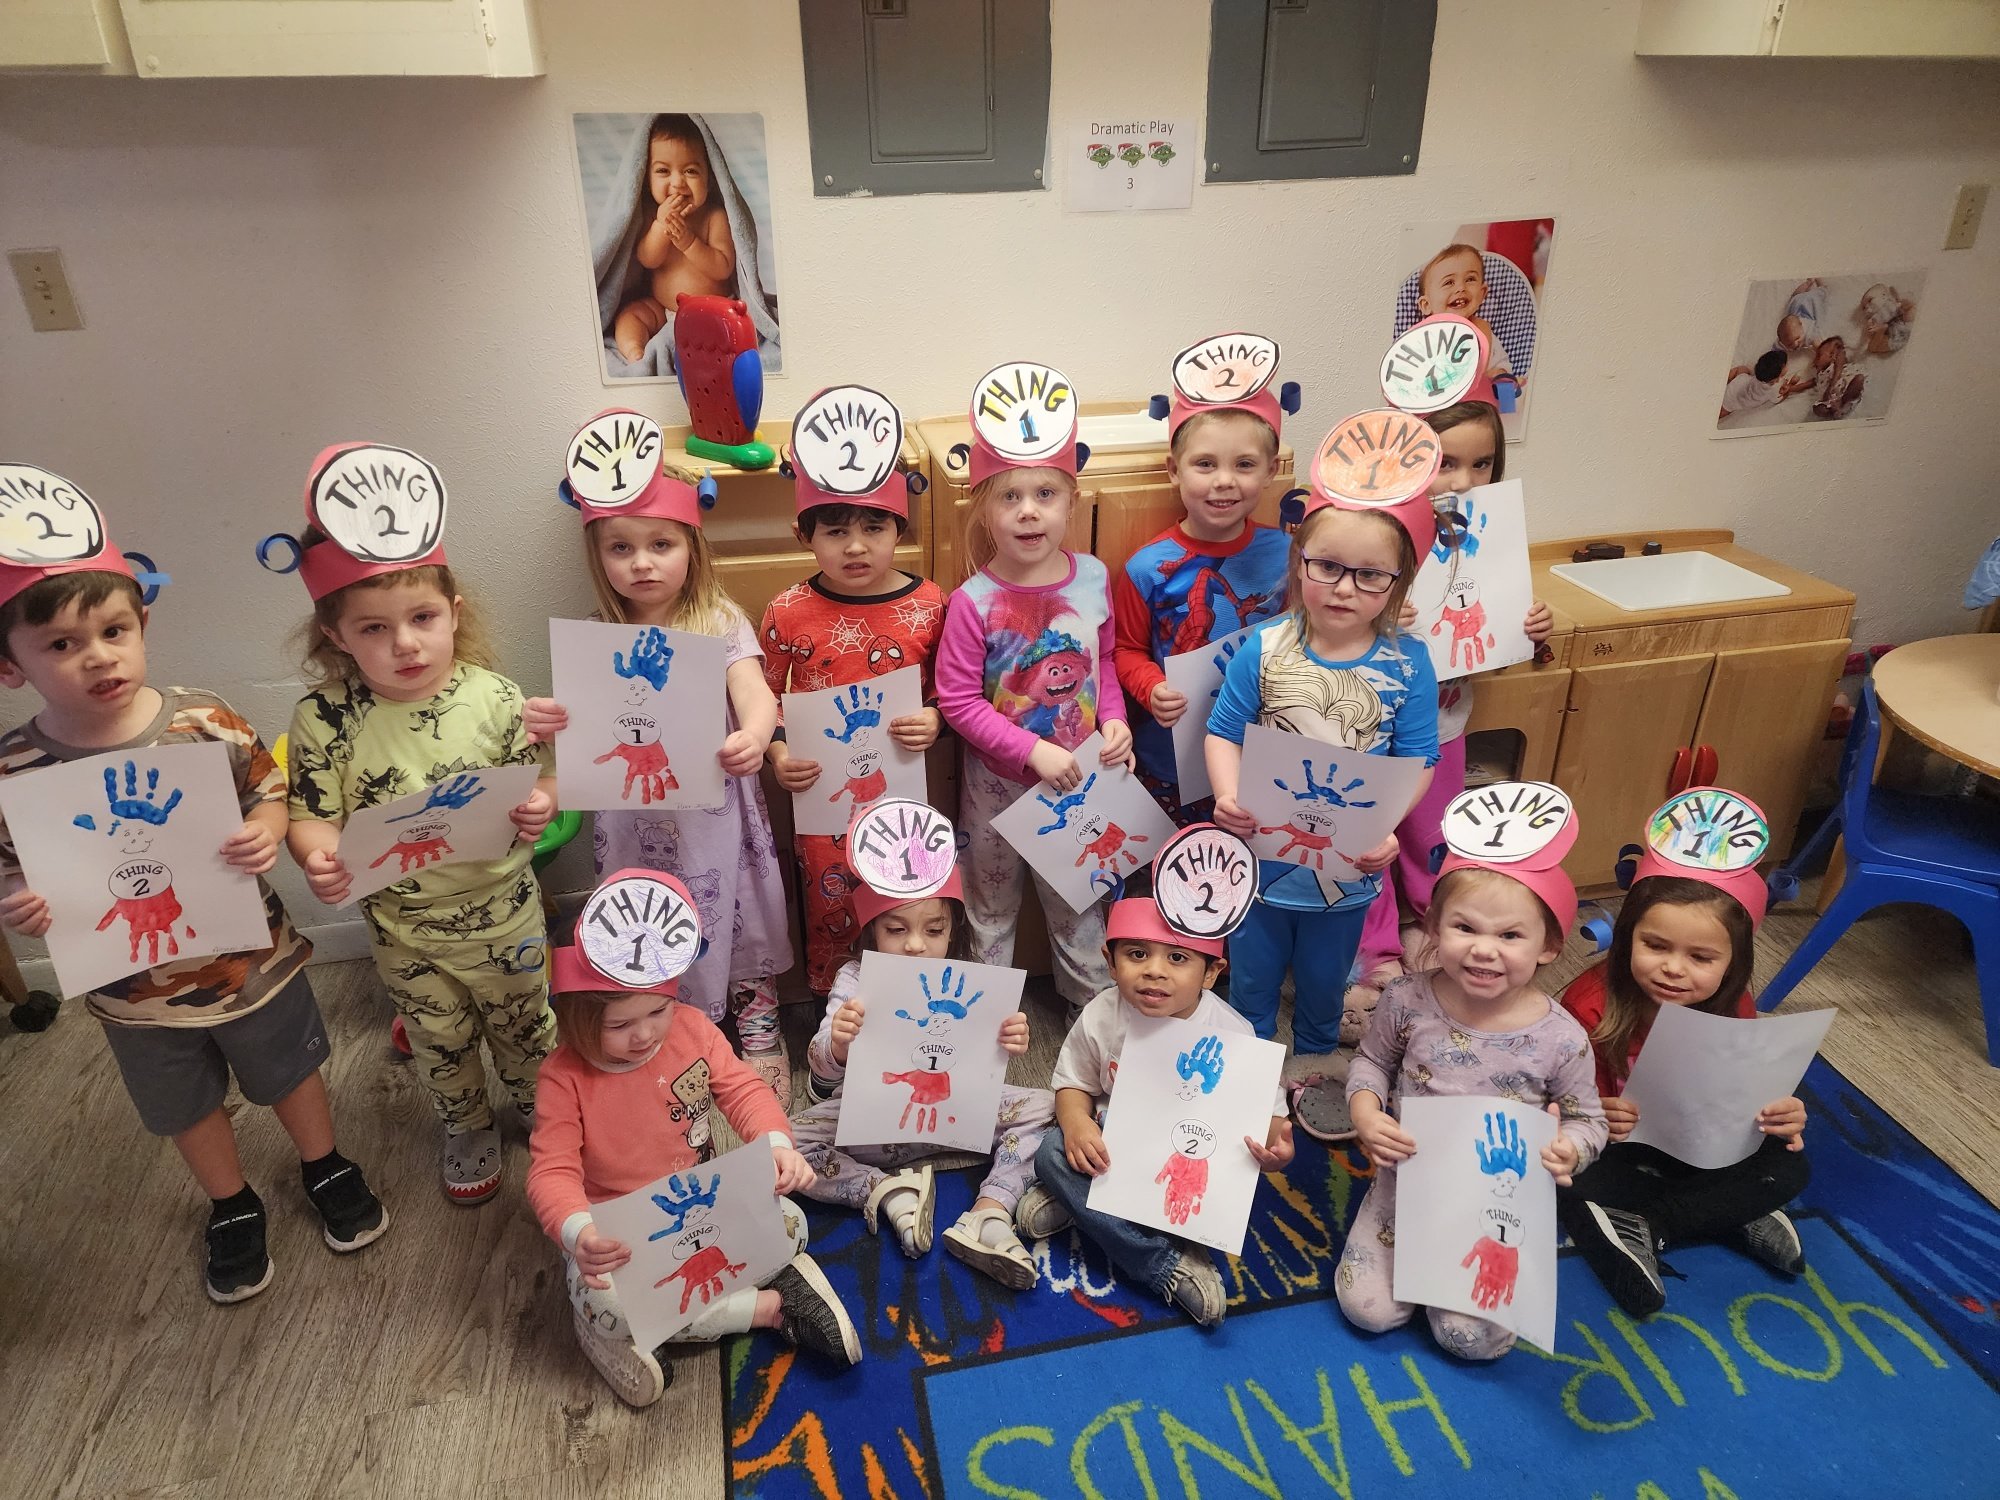  Ms. Beeson reported, "Mangum 3 year olds celebrated Dr. Seuss week and Thursday was One fish, two fish, red fish blue fish wear red and blue and Friday was wear favorite pj's. We also painted hand prints of Thing 1 and Thing 2." 